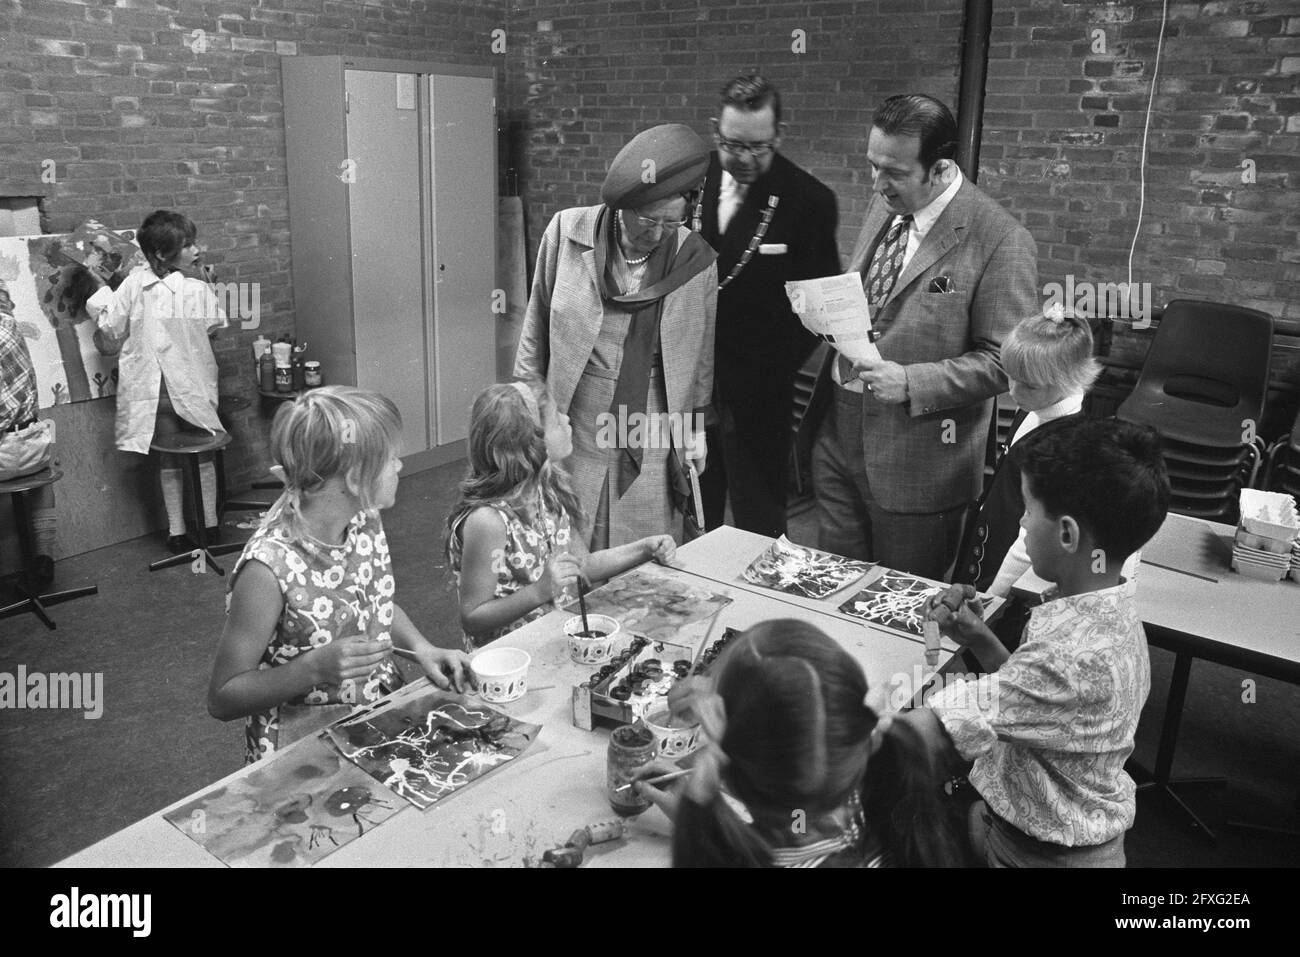 Queen Juliana visits municipalities Rhoon, Poortugaal and Maassluis ( South Holland ), Queen Juliana looks at performances of children in Trefcentrum De Korn in, September 24, 1971, mayors, children, queens, The Netherlands, 20th century press agency photo, news to remember, documentary, historic photography 1945-1990, visual stories, human history of the Twentieth Century, capturing moments in time Stock Photo